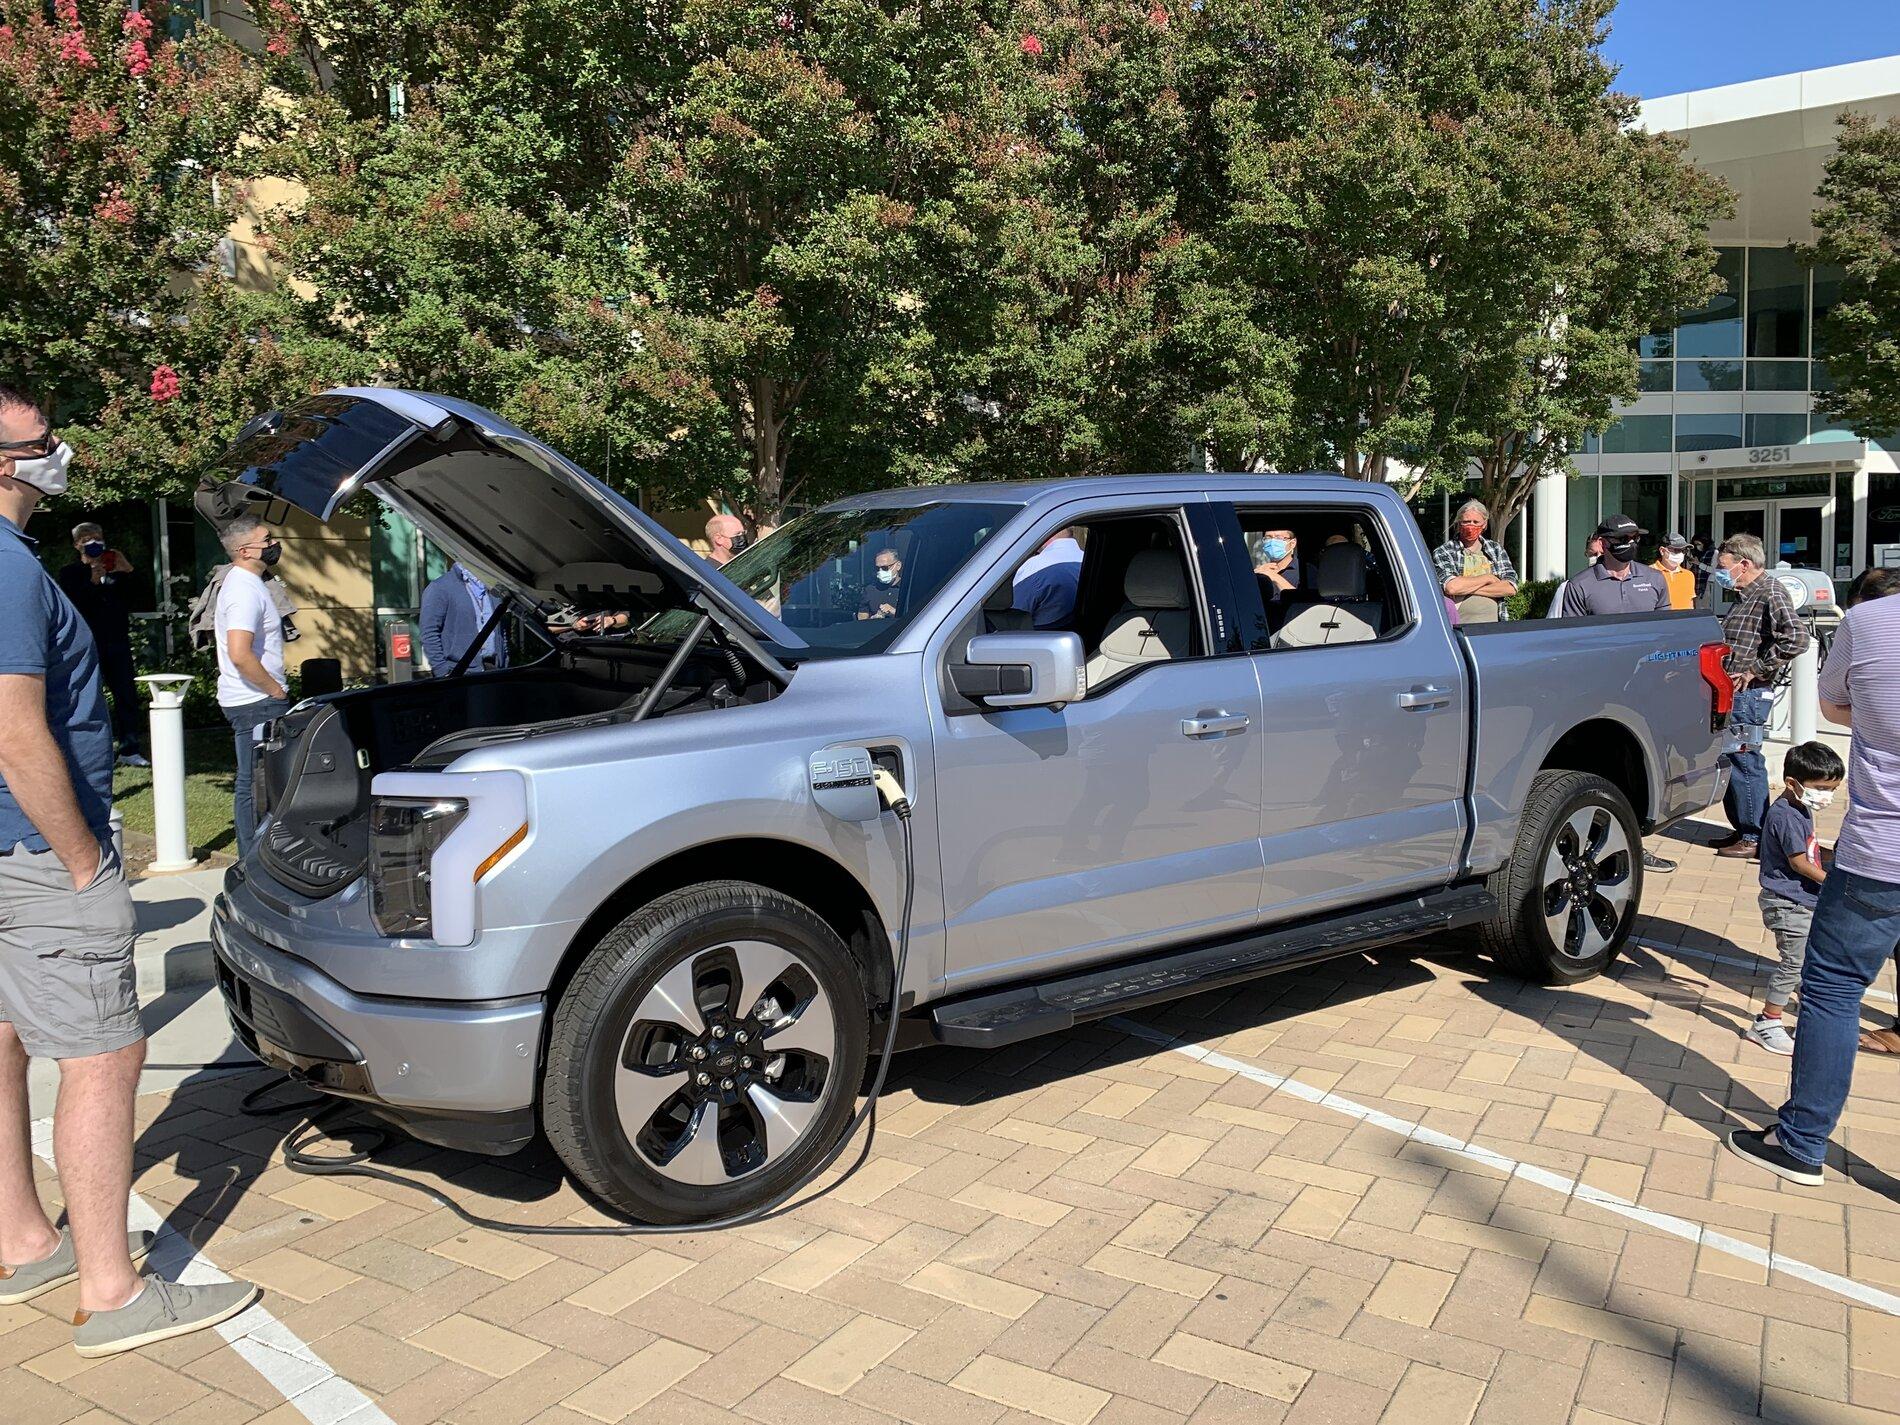 Ford F-150 Lightning Answers & Info From F-150 Lightning Event. 300 mile range with 1000 lbs payload confirmed f7f404eb-586b-445e-8a7f-5c3bb7f5a78c-jpe